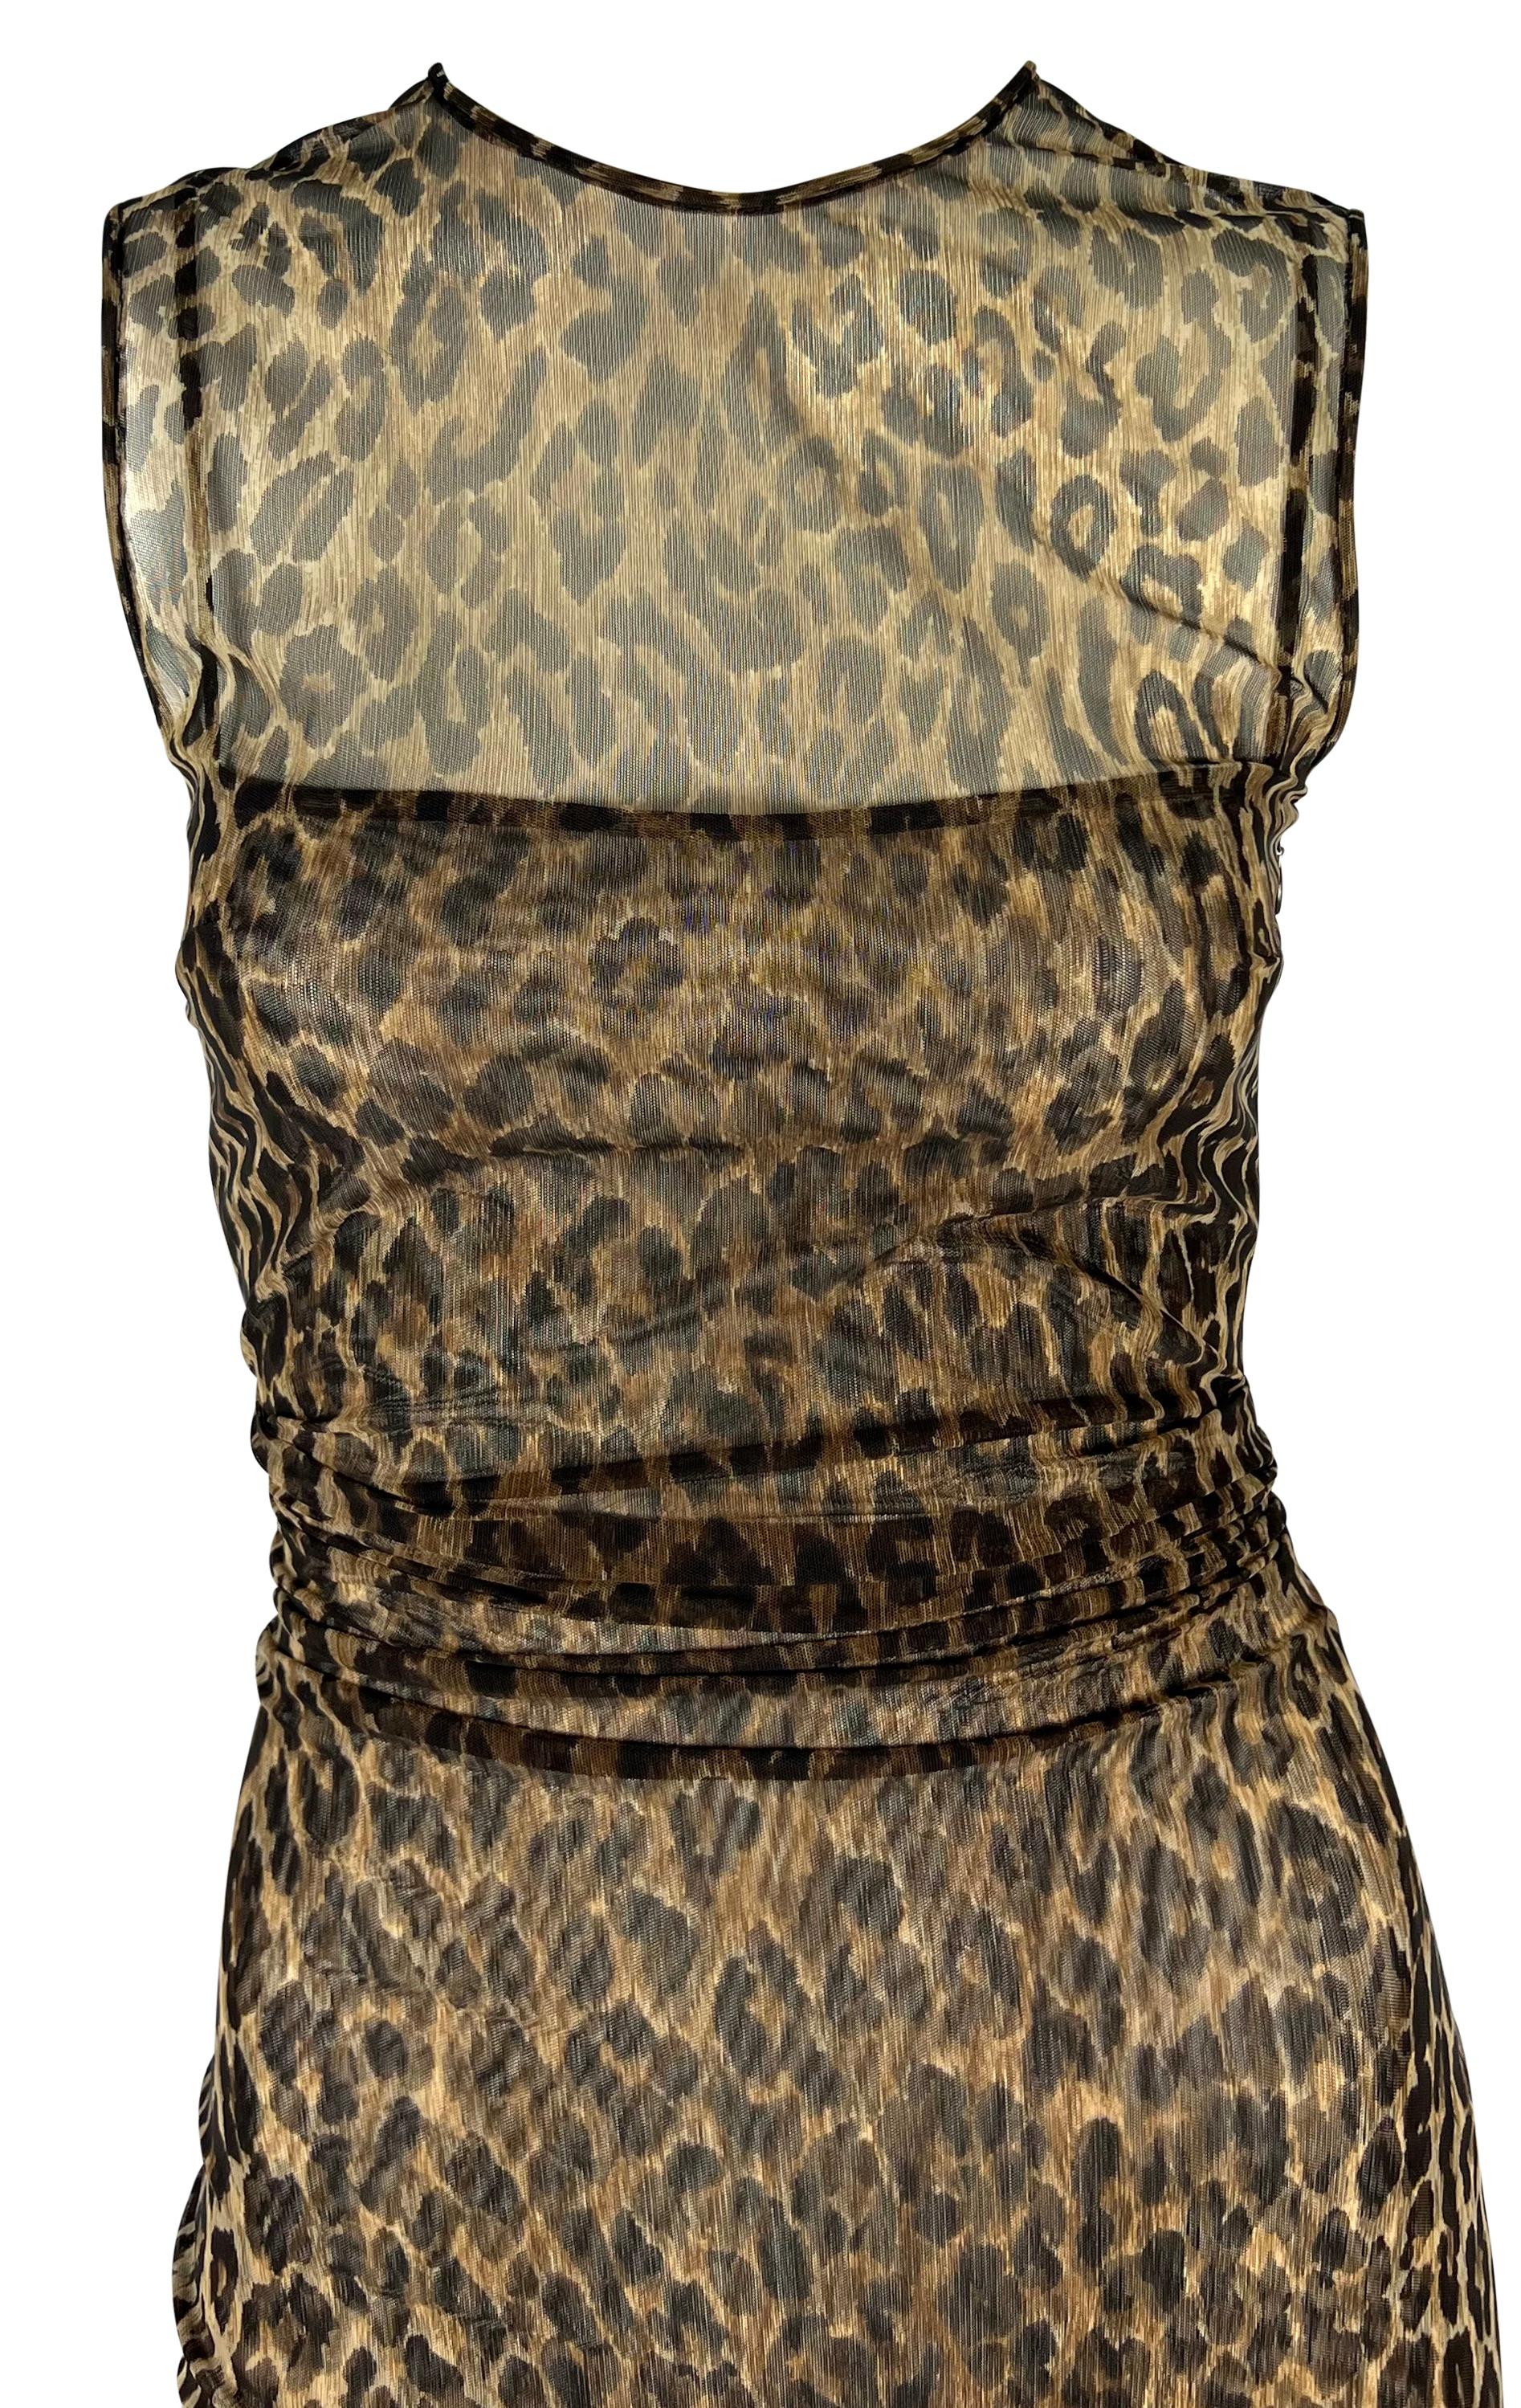 From the late 1990s, this sheer Dolce & Gabbana cheetah print dress clings to the body. The stretch mesh dress is covered in a bold cheetah print and features two layers: an interior slip and an exterior sleeveless design. This enticing dress falls